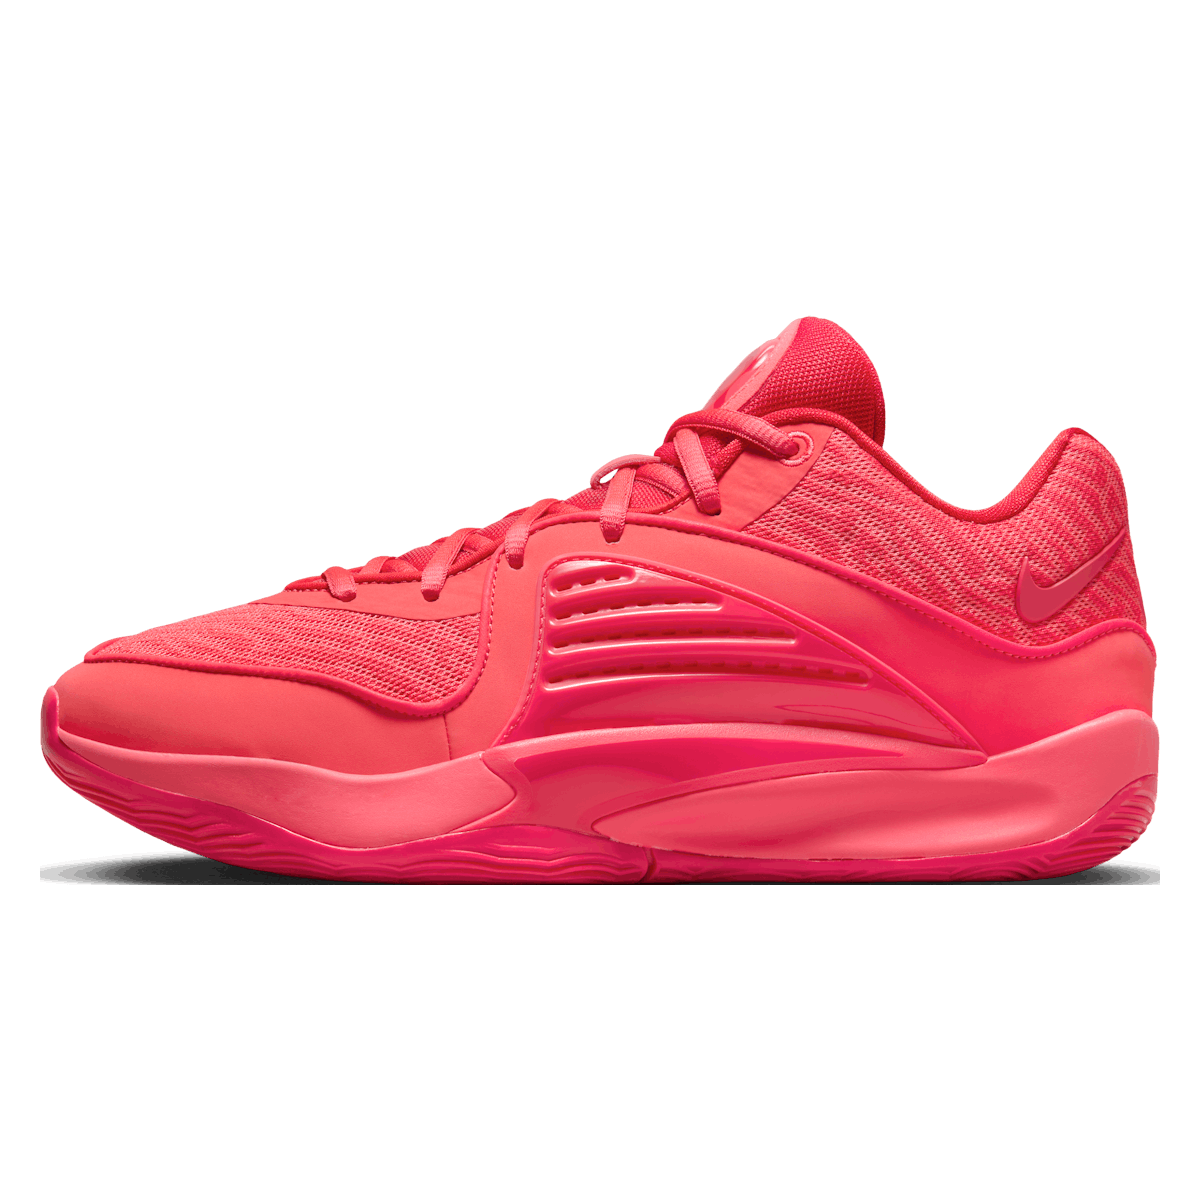 Nike KD16 "Light Fusion Red"